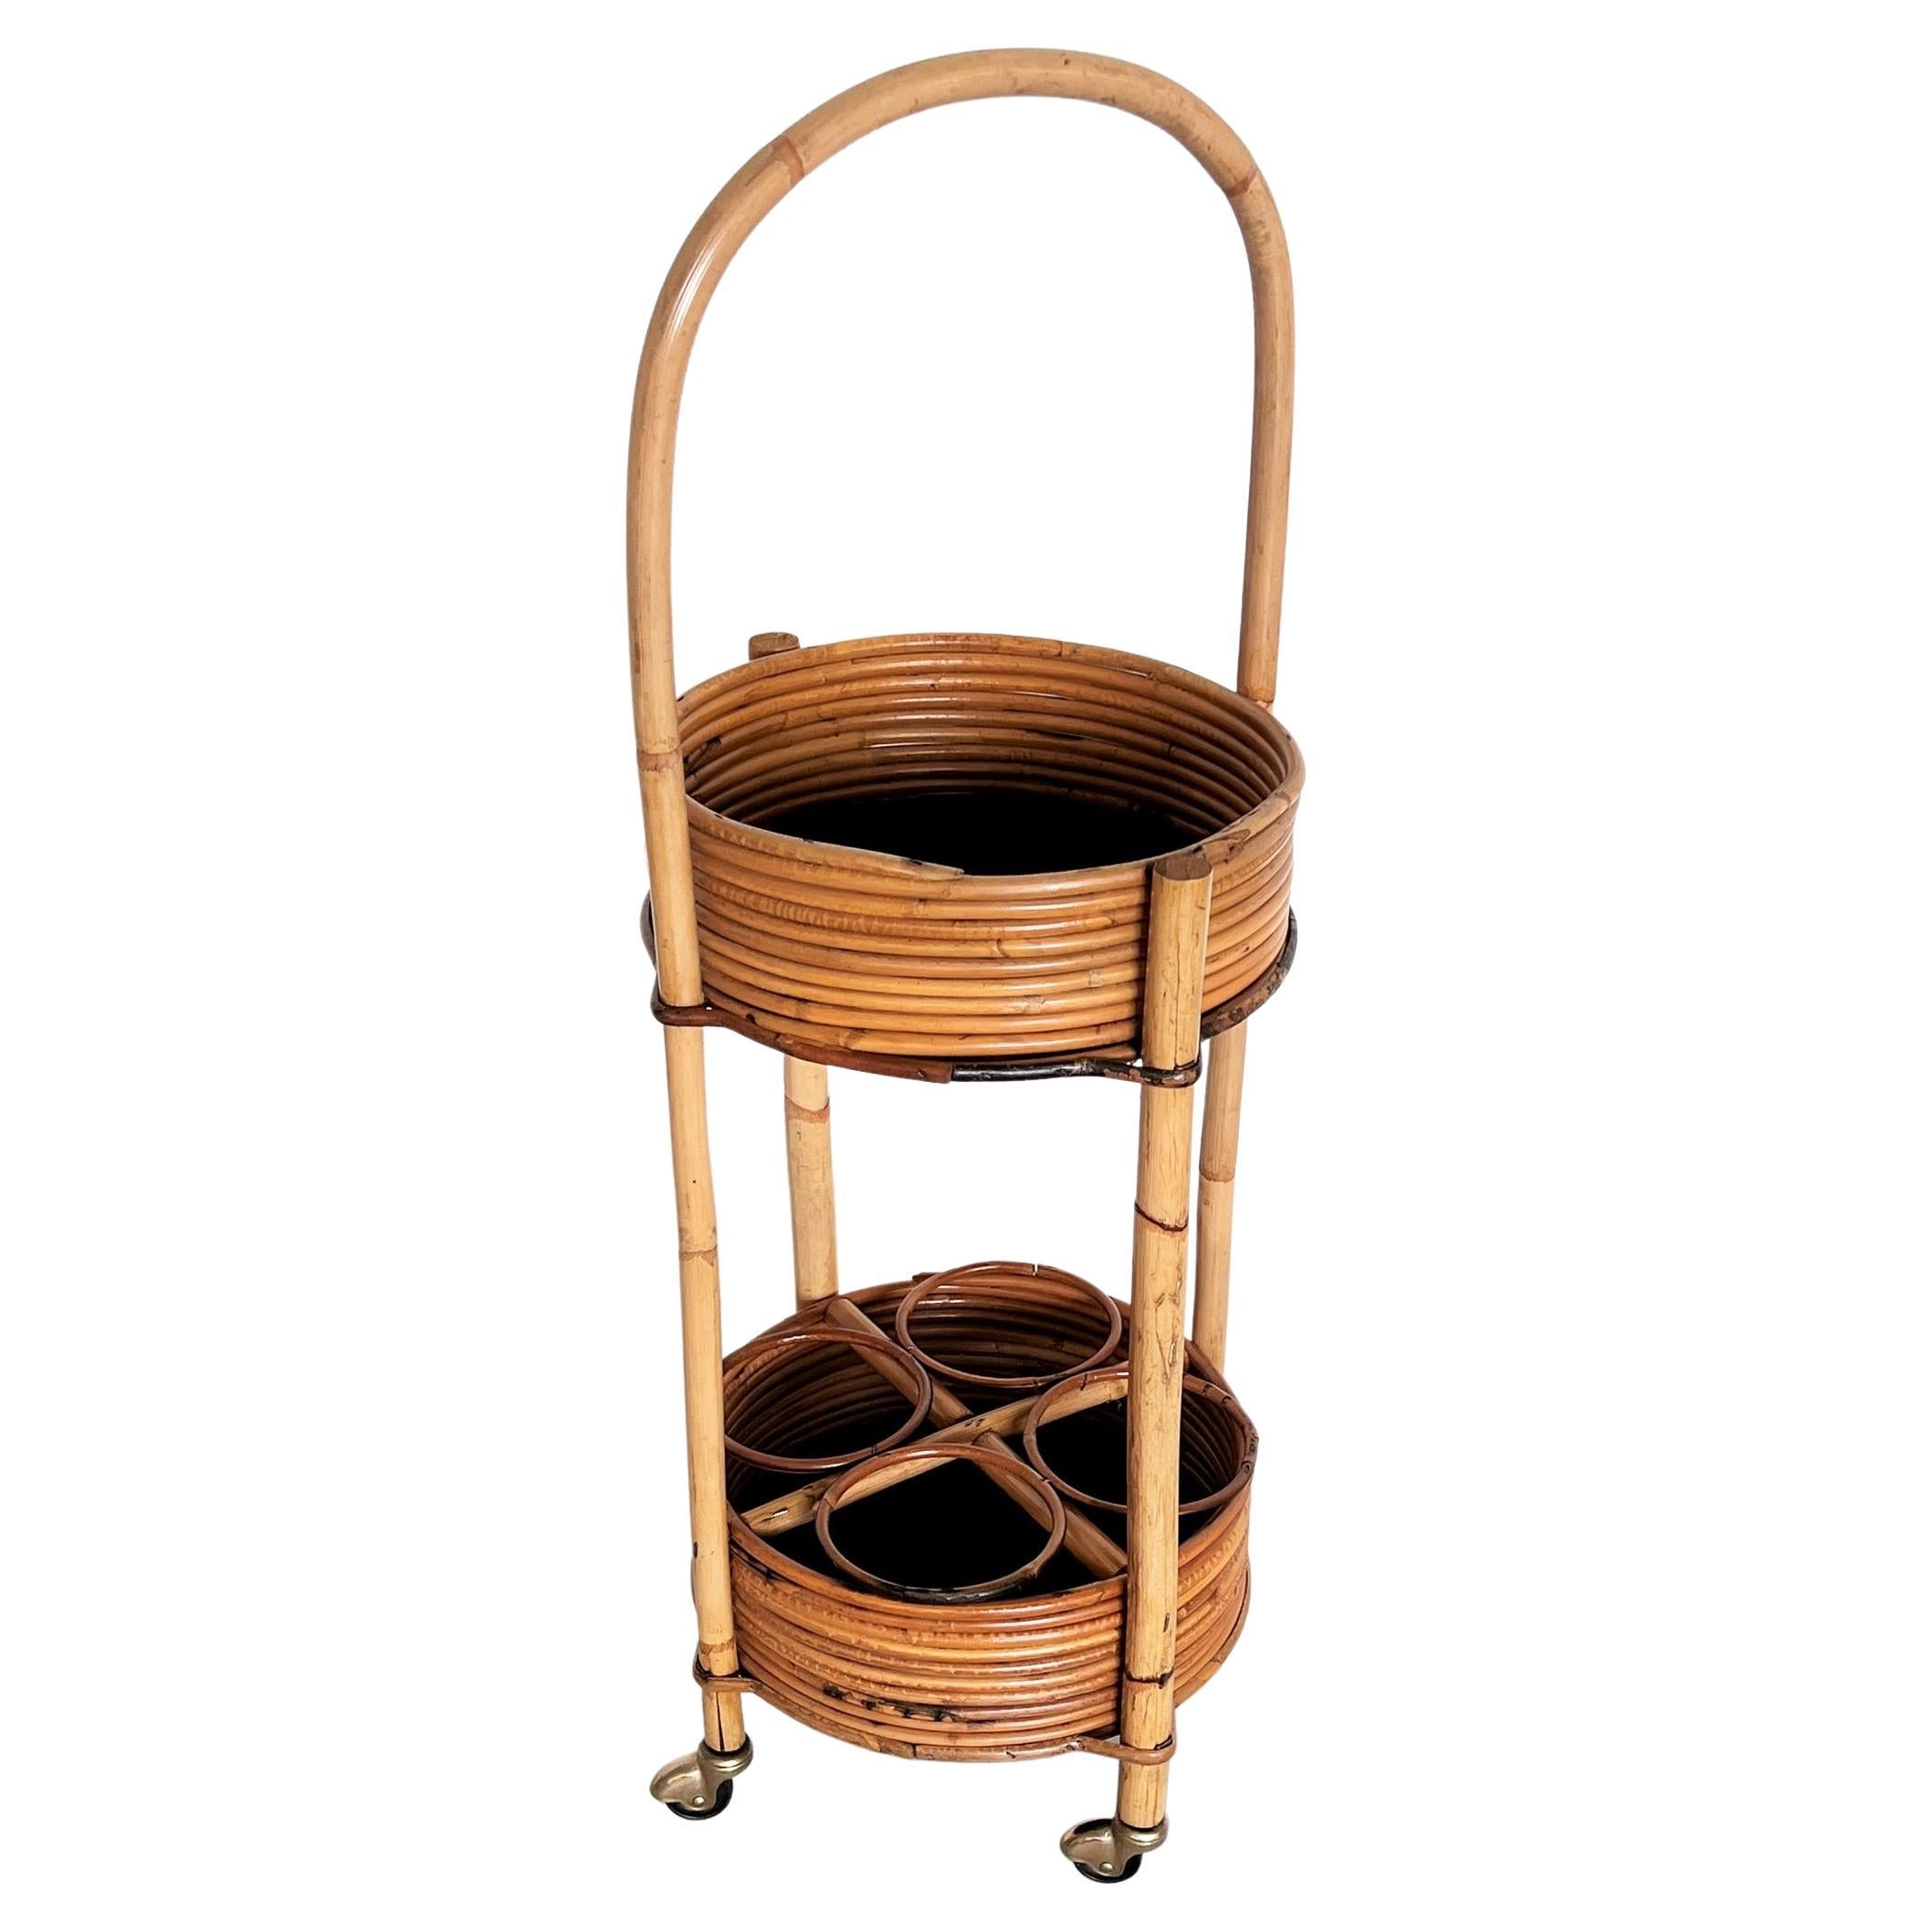 Italian Mid-Century Bamboo and Rattan Serving Bar Cart or Trolley, 1960